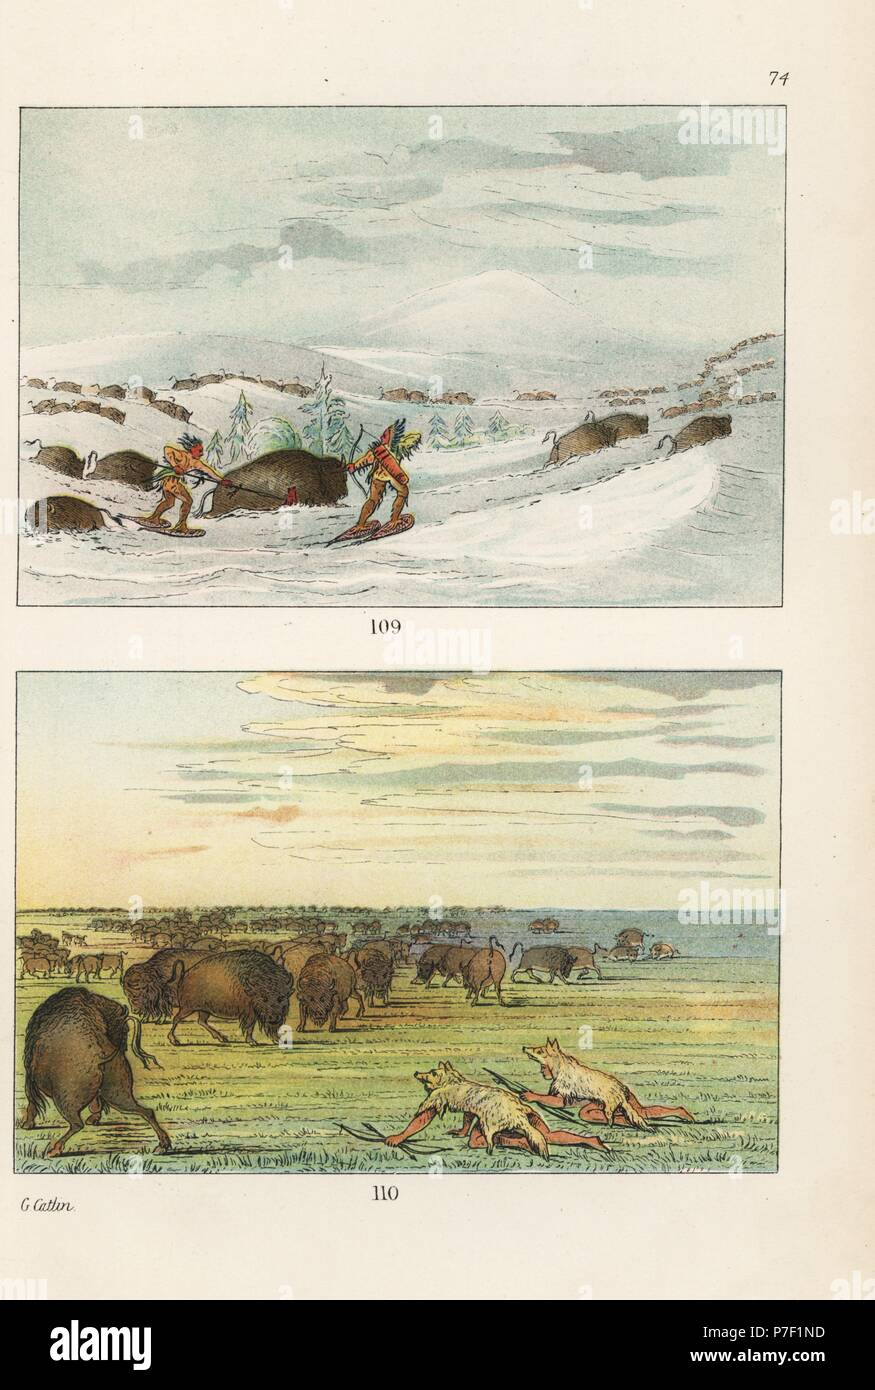 Native Americans in snow shoes hunting buffalo or bison in winter snow 109, and wearing white wolf skins to hunt bison on the prairie 110. Handcoloured lithograph from George Catlin's Manners, Customs and Condition of the North American Indians, London, 1841. Stock Photo